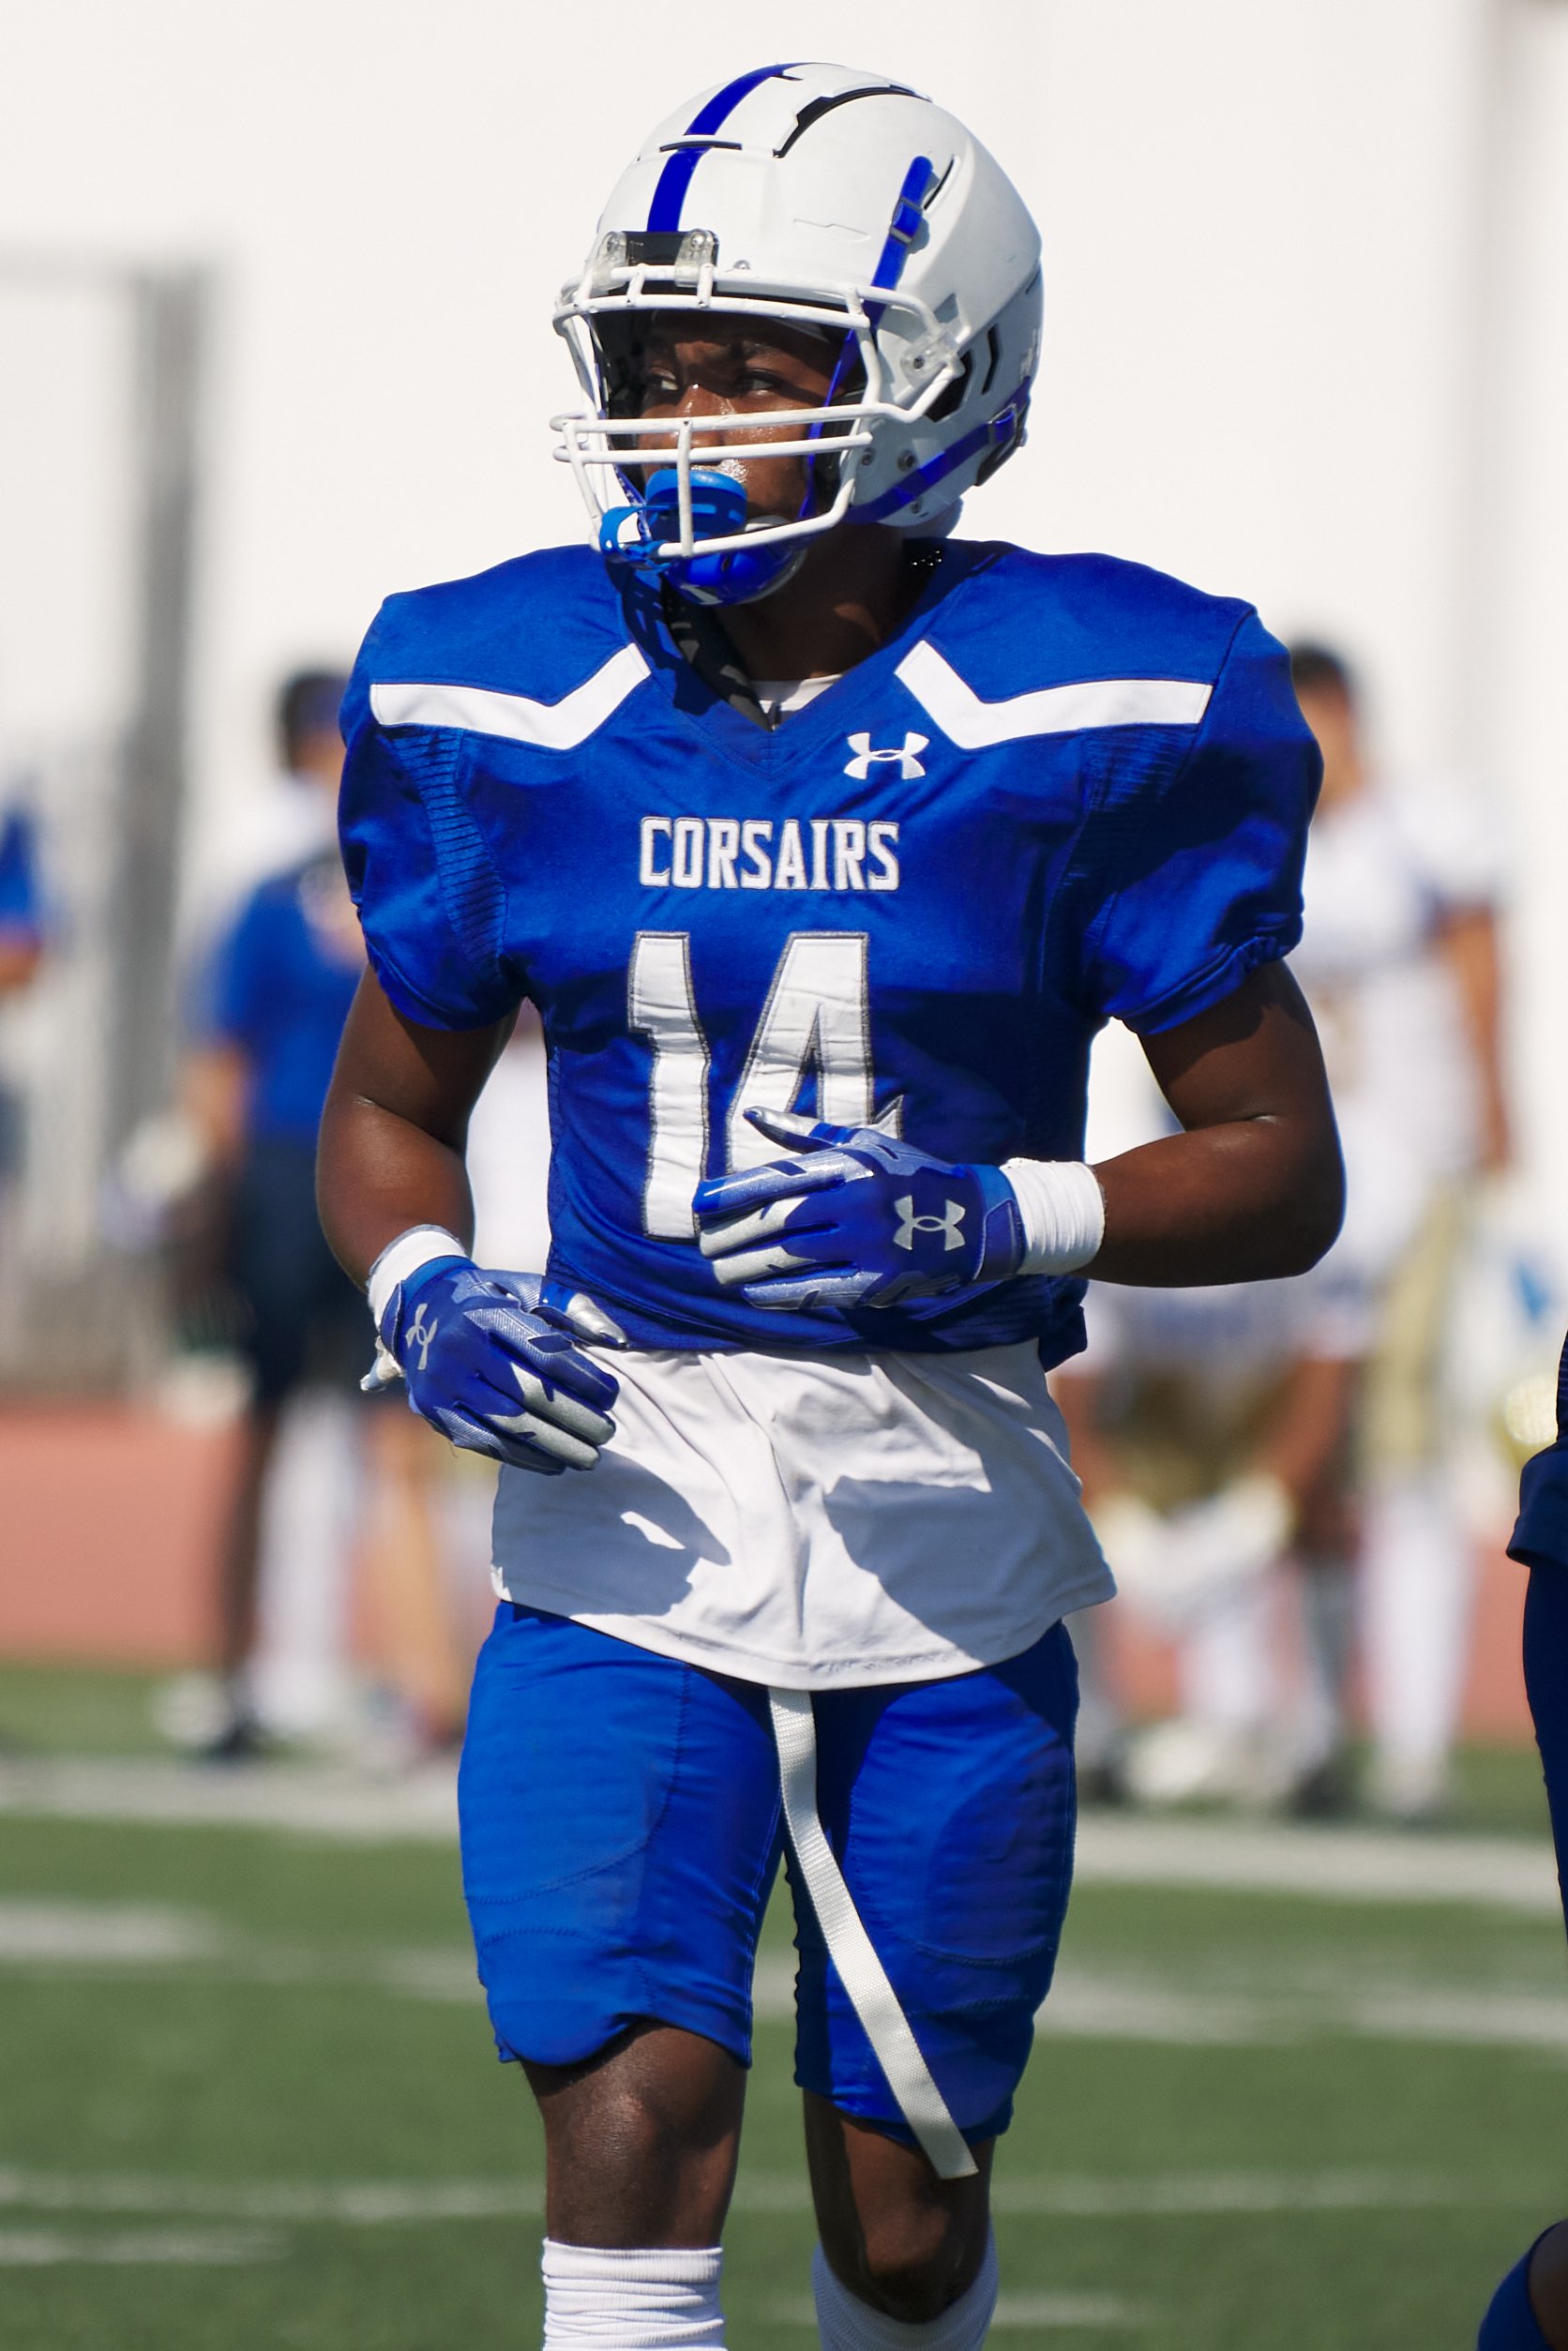  Santa Monica College Corsairs' Jaboree Thornton during the football match against the West Los Angeles College Wildcats on Saturday, October 1, 2022, at Corsair Field in Santa Monica, Calif. The Corsairs won 41-40. (Nicholas McCall | The Corsair) 